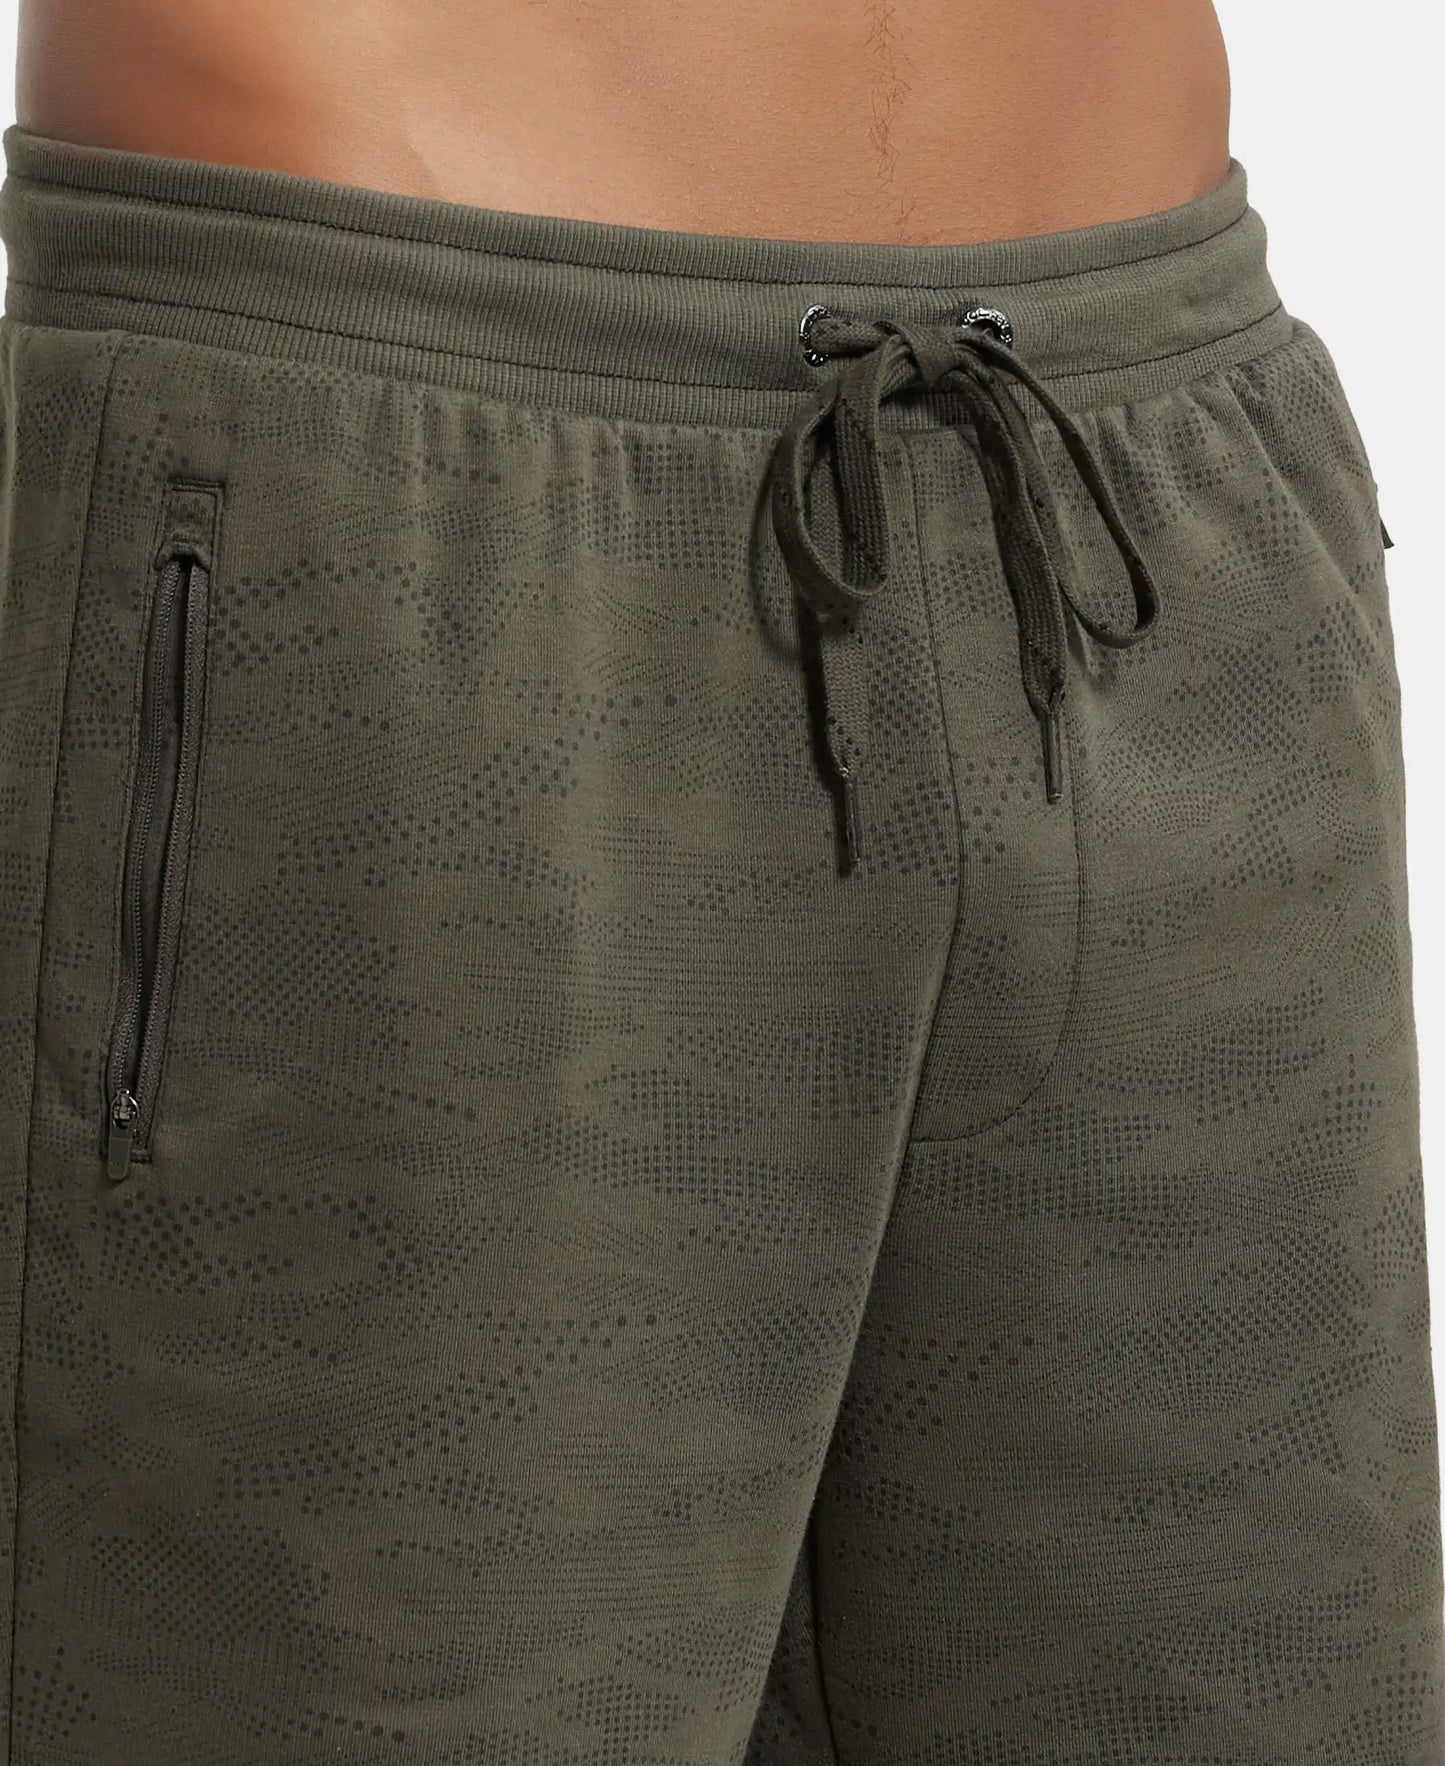 Super Combed Cotton Rich Straight Fit Shorts with Zipper Pockets - Deep Olive Printed-6